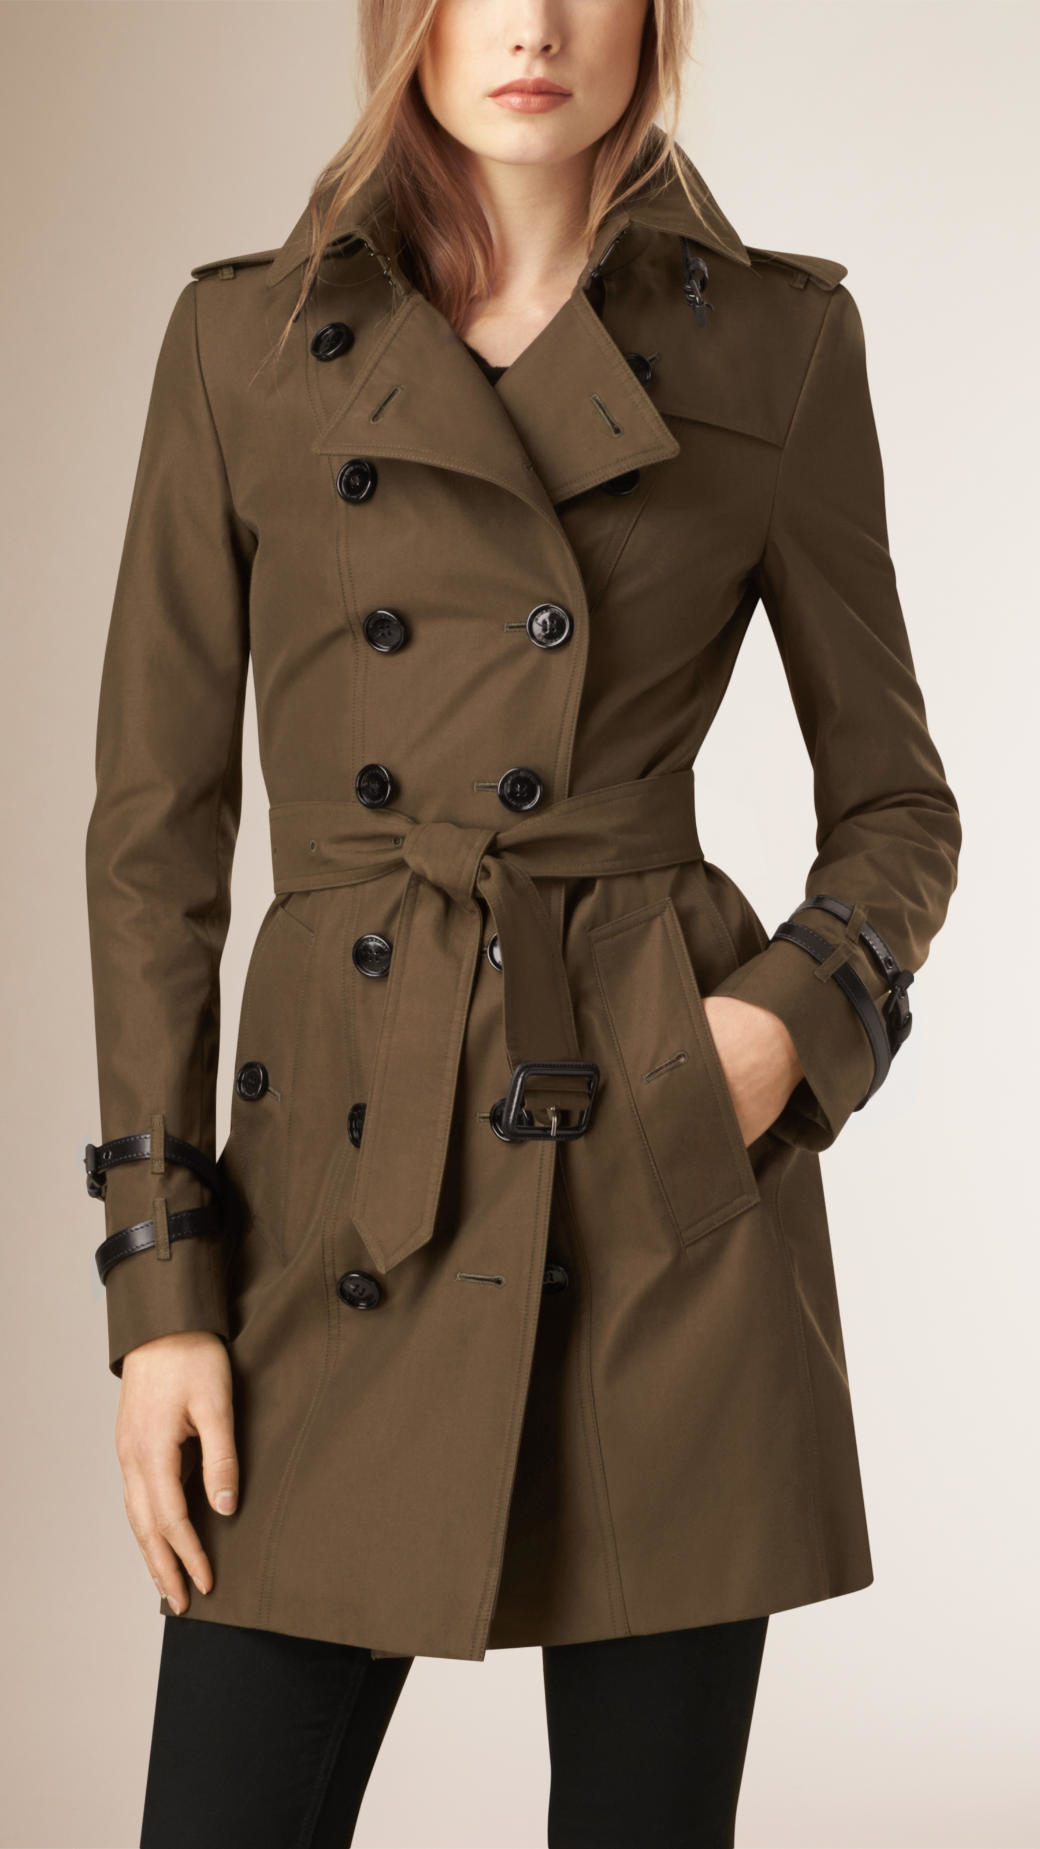 burberry trench coat womens green Online Shopping for Women, Men, Kids  Fashion & Lifestyle|Free Delivery & Returns! -